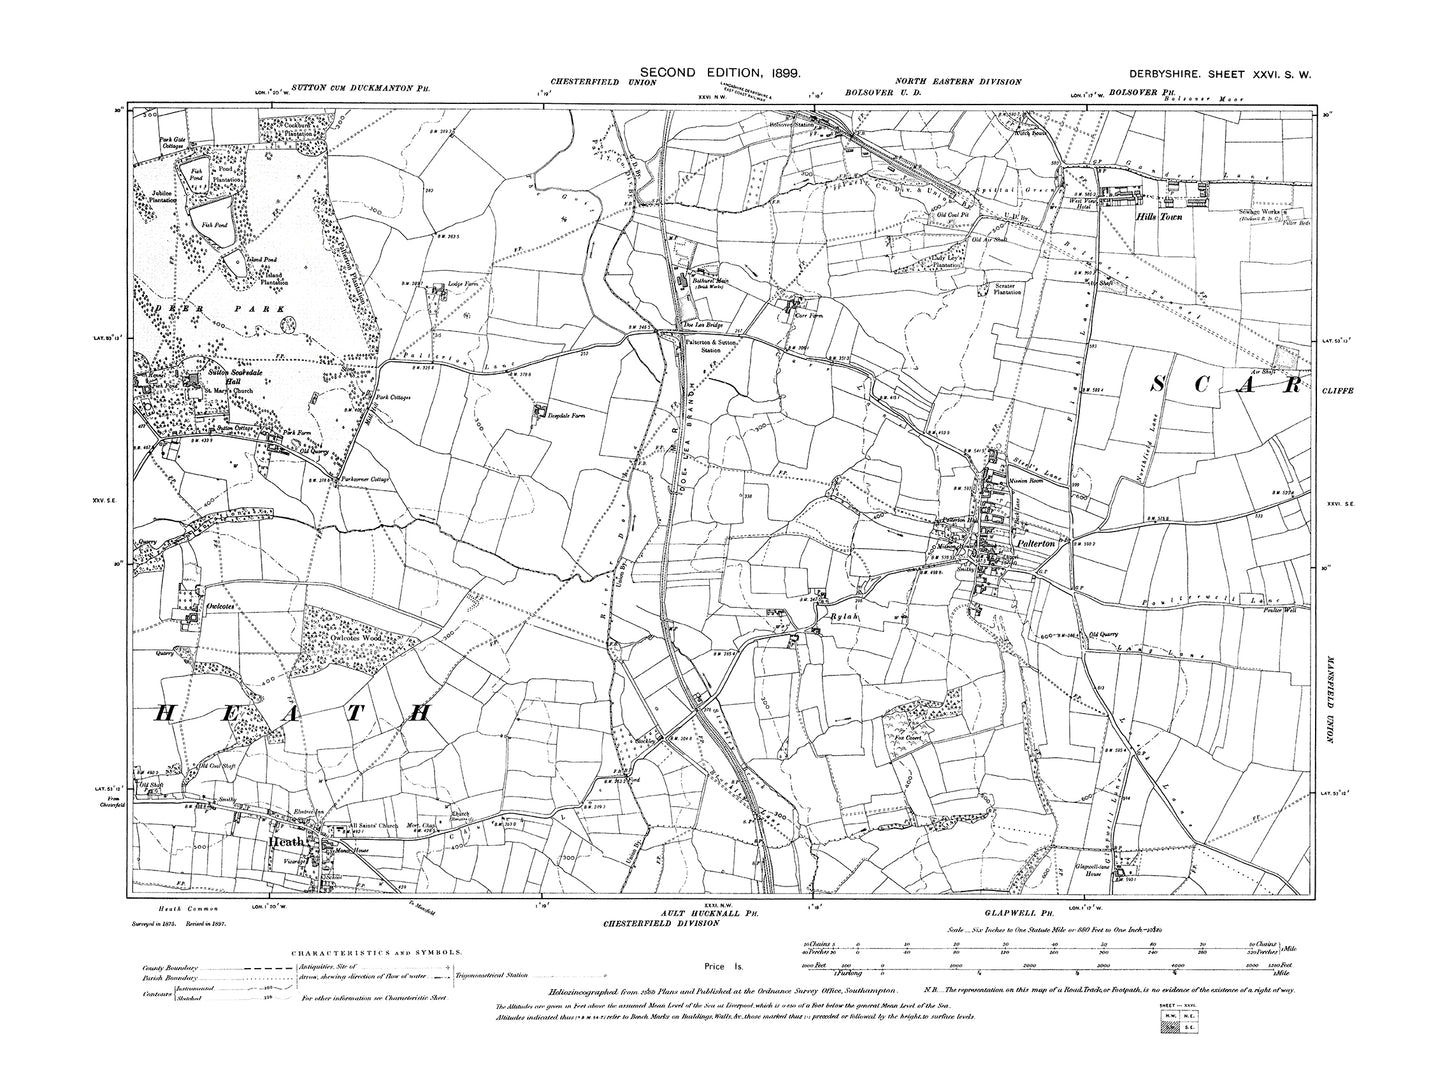 Old OS map dated 1899, showing Palterton, Heath in Derbyshire 26SW